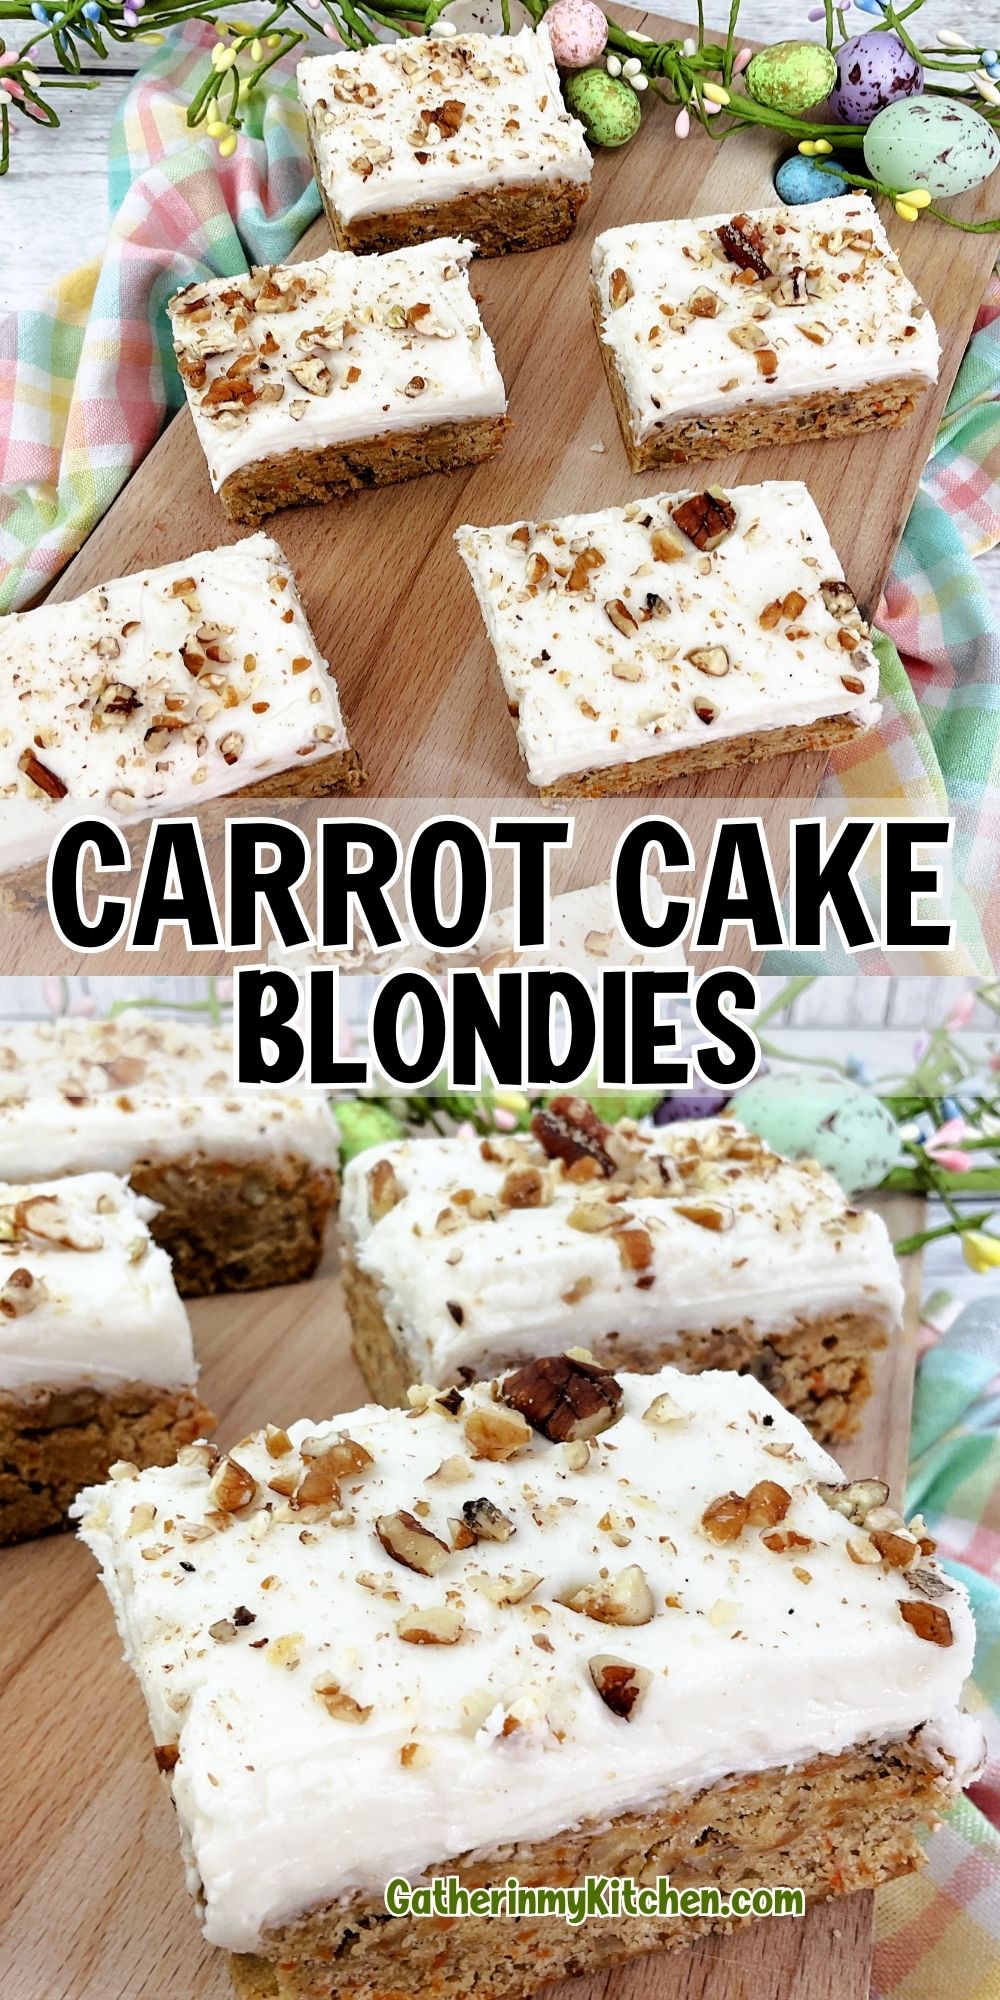 Pin image: top and bottom have pics of carrot cake bars, middle says "Carrot Cake Blondies".